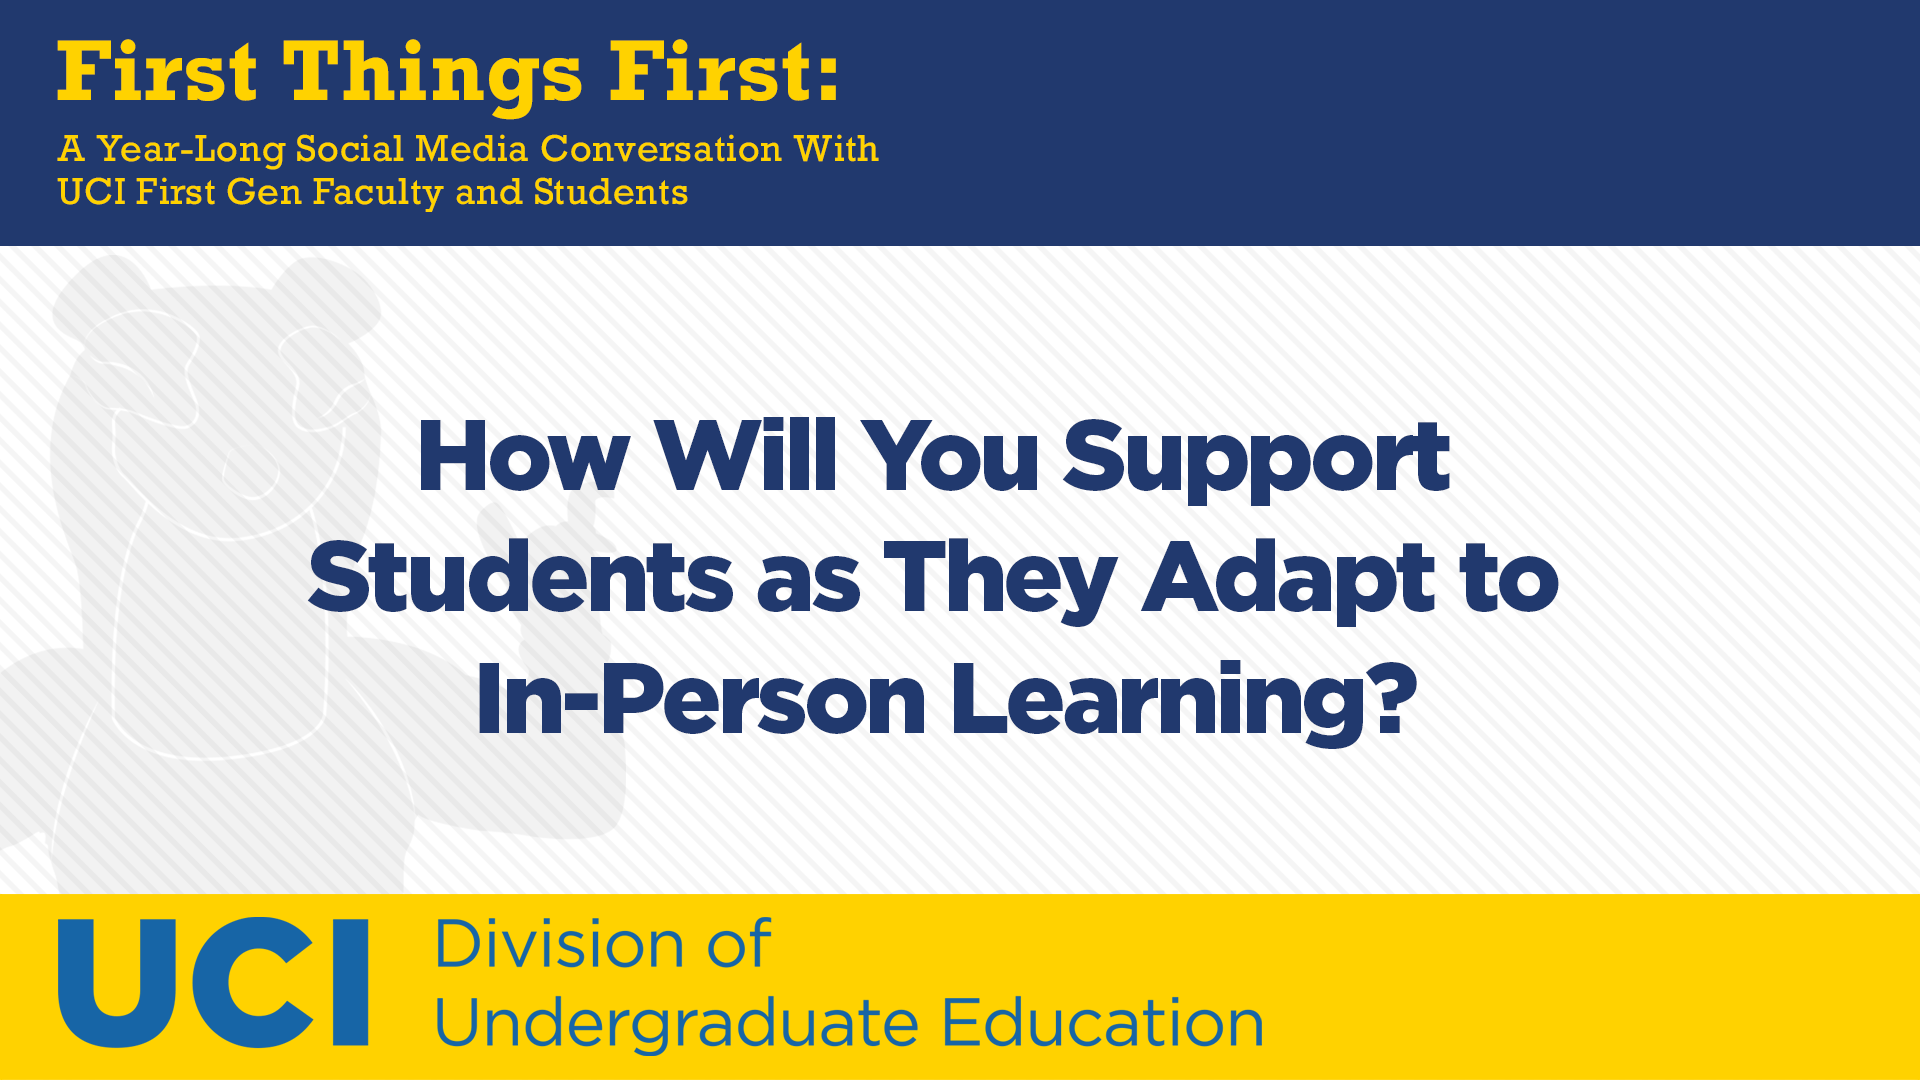 How Will You Support Students as They Adapt to In-Person Learning?